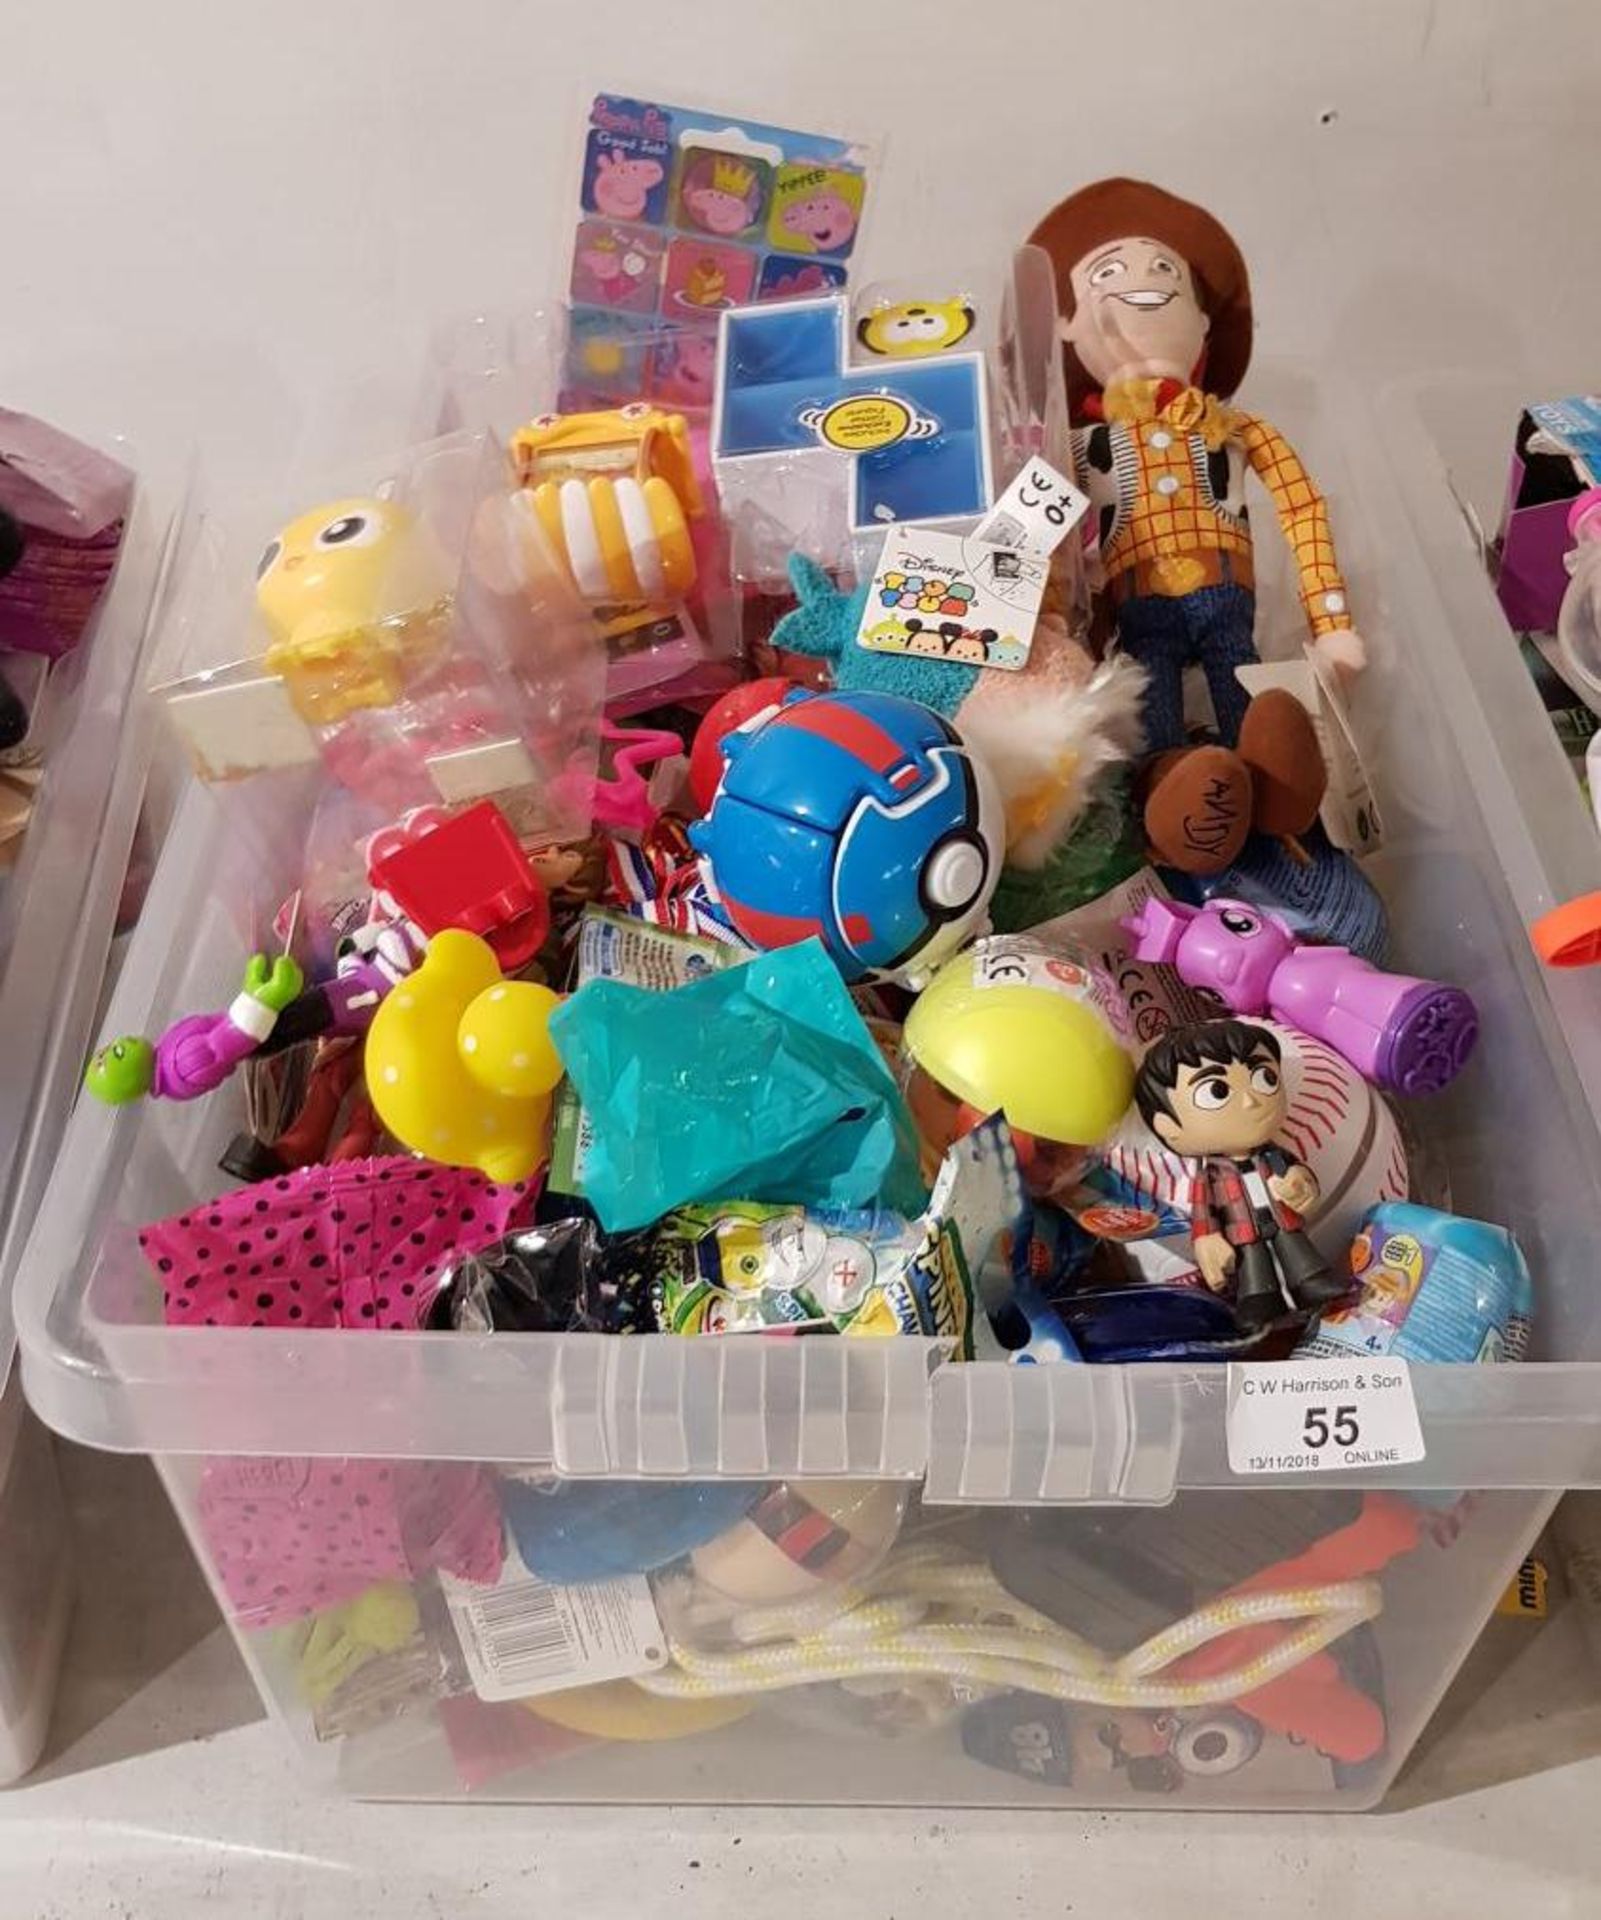 Contents Of Box – Small Toys